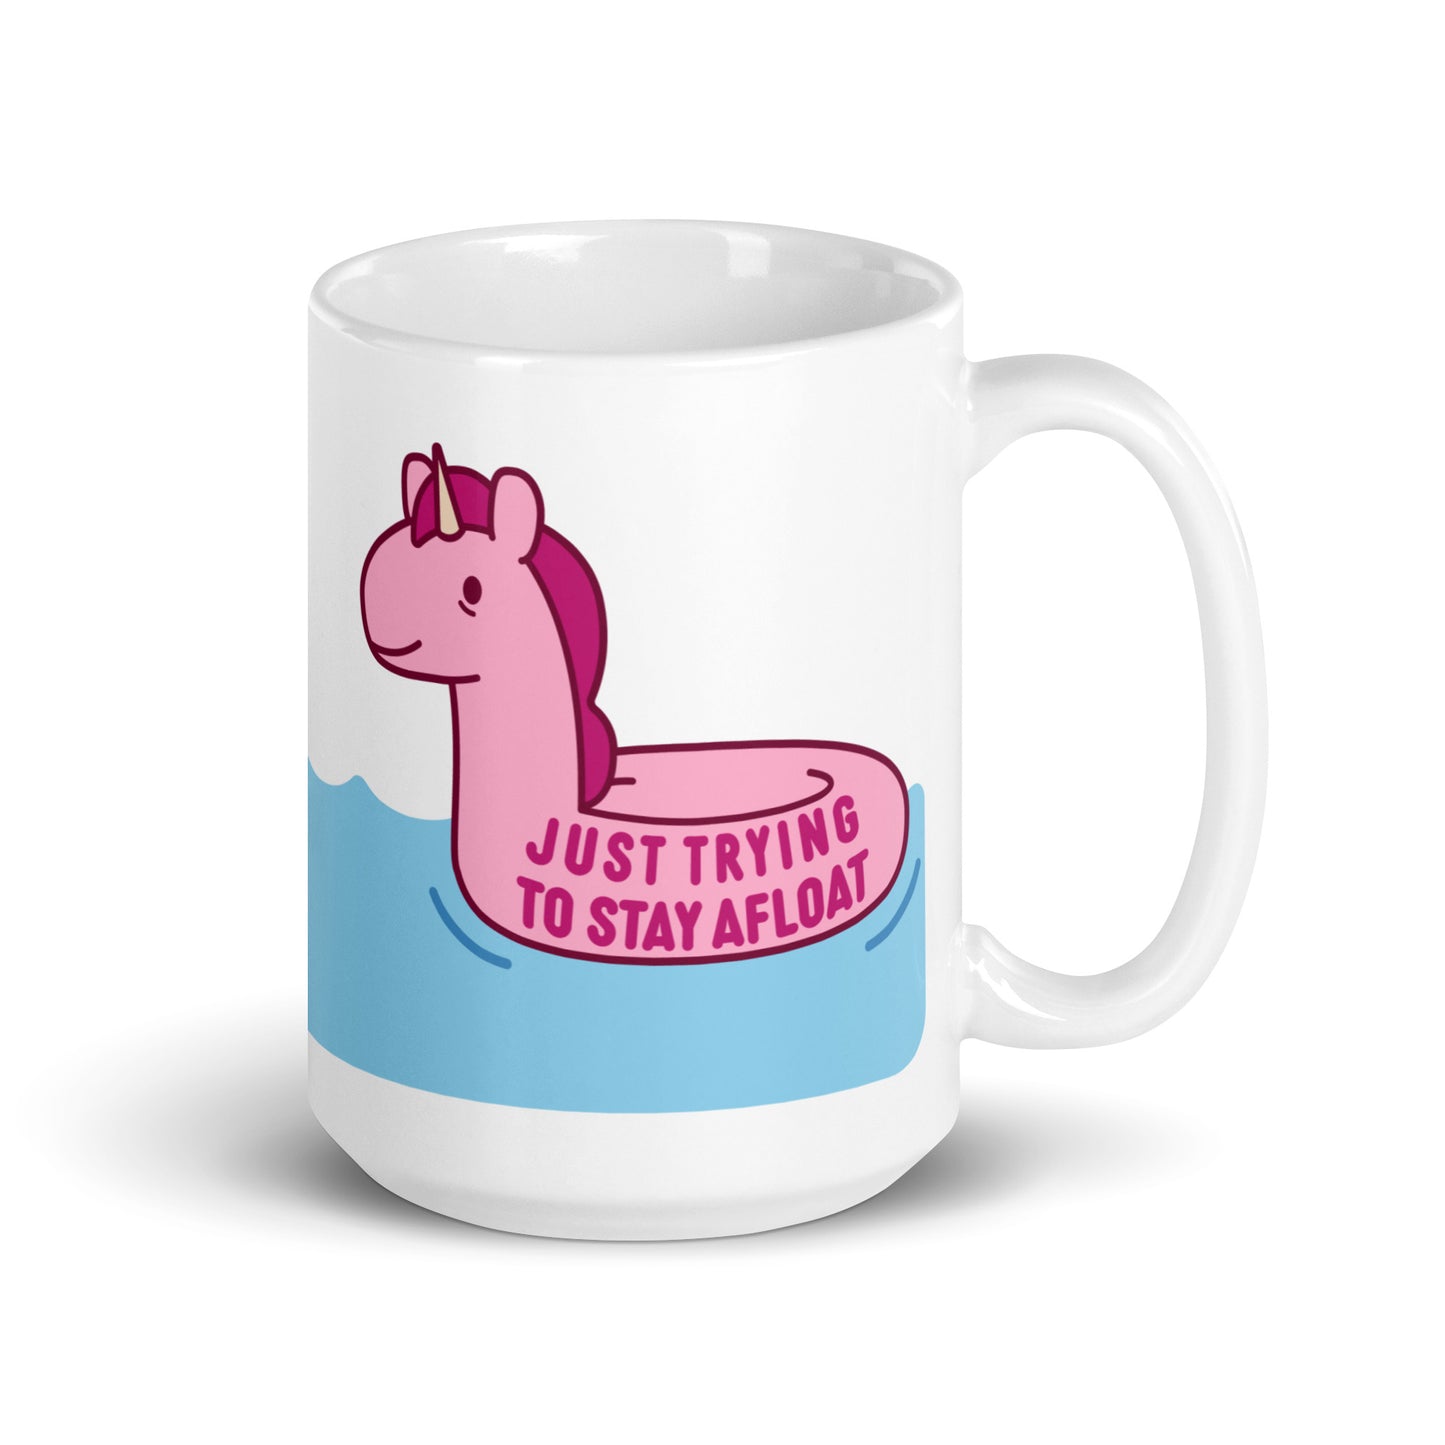 A white 15oz ceramic mug with a pink unicorn pool float floating on water and text reading "Just trying to stay afloat"